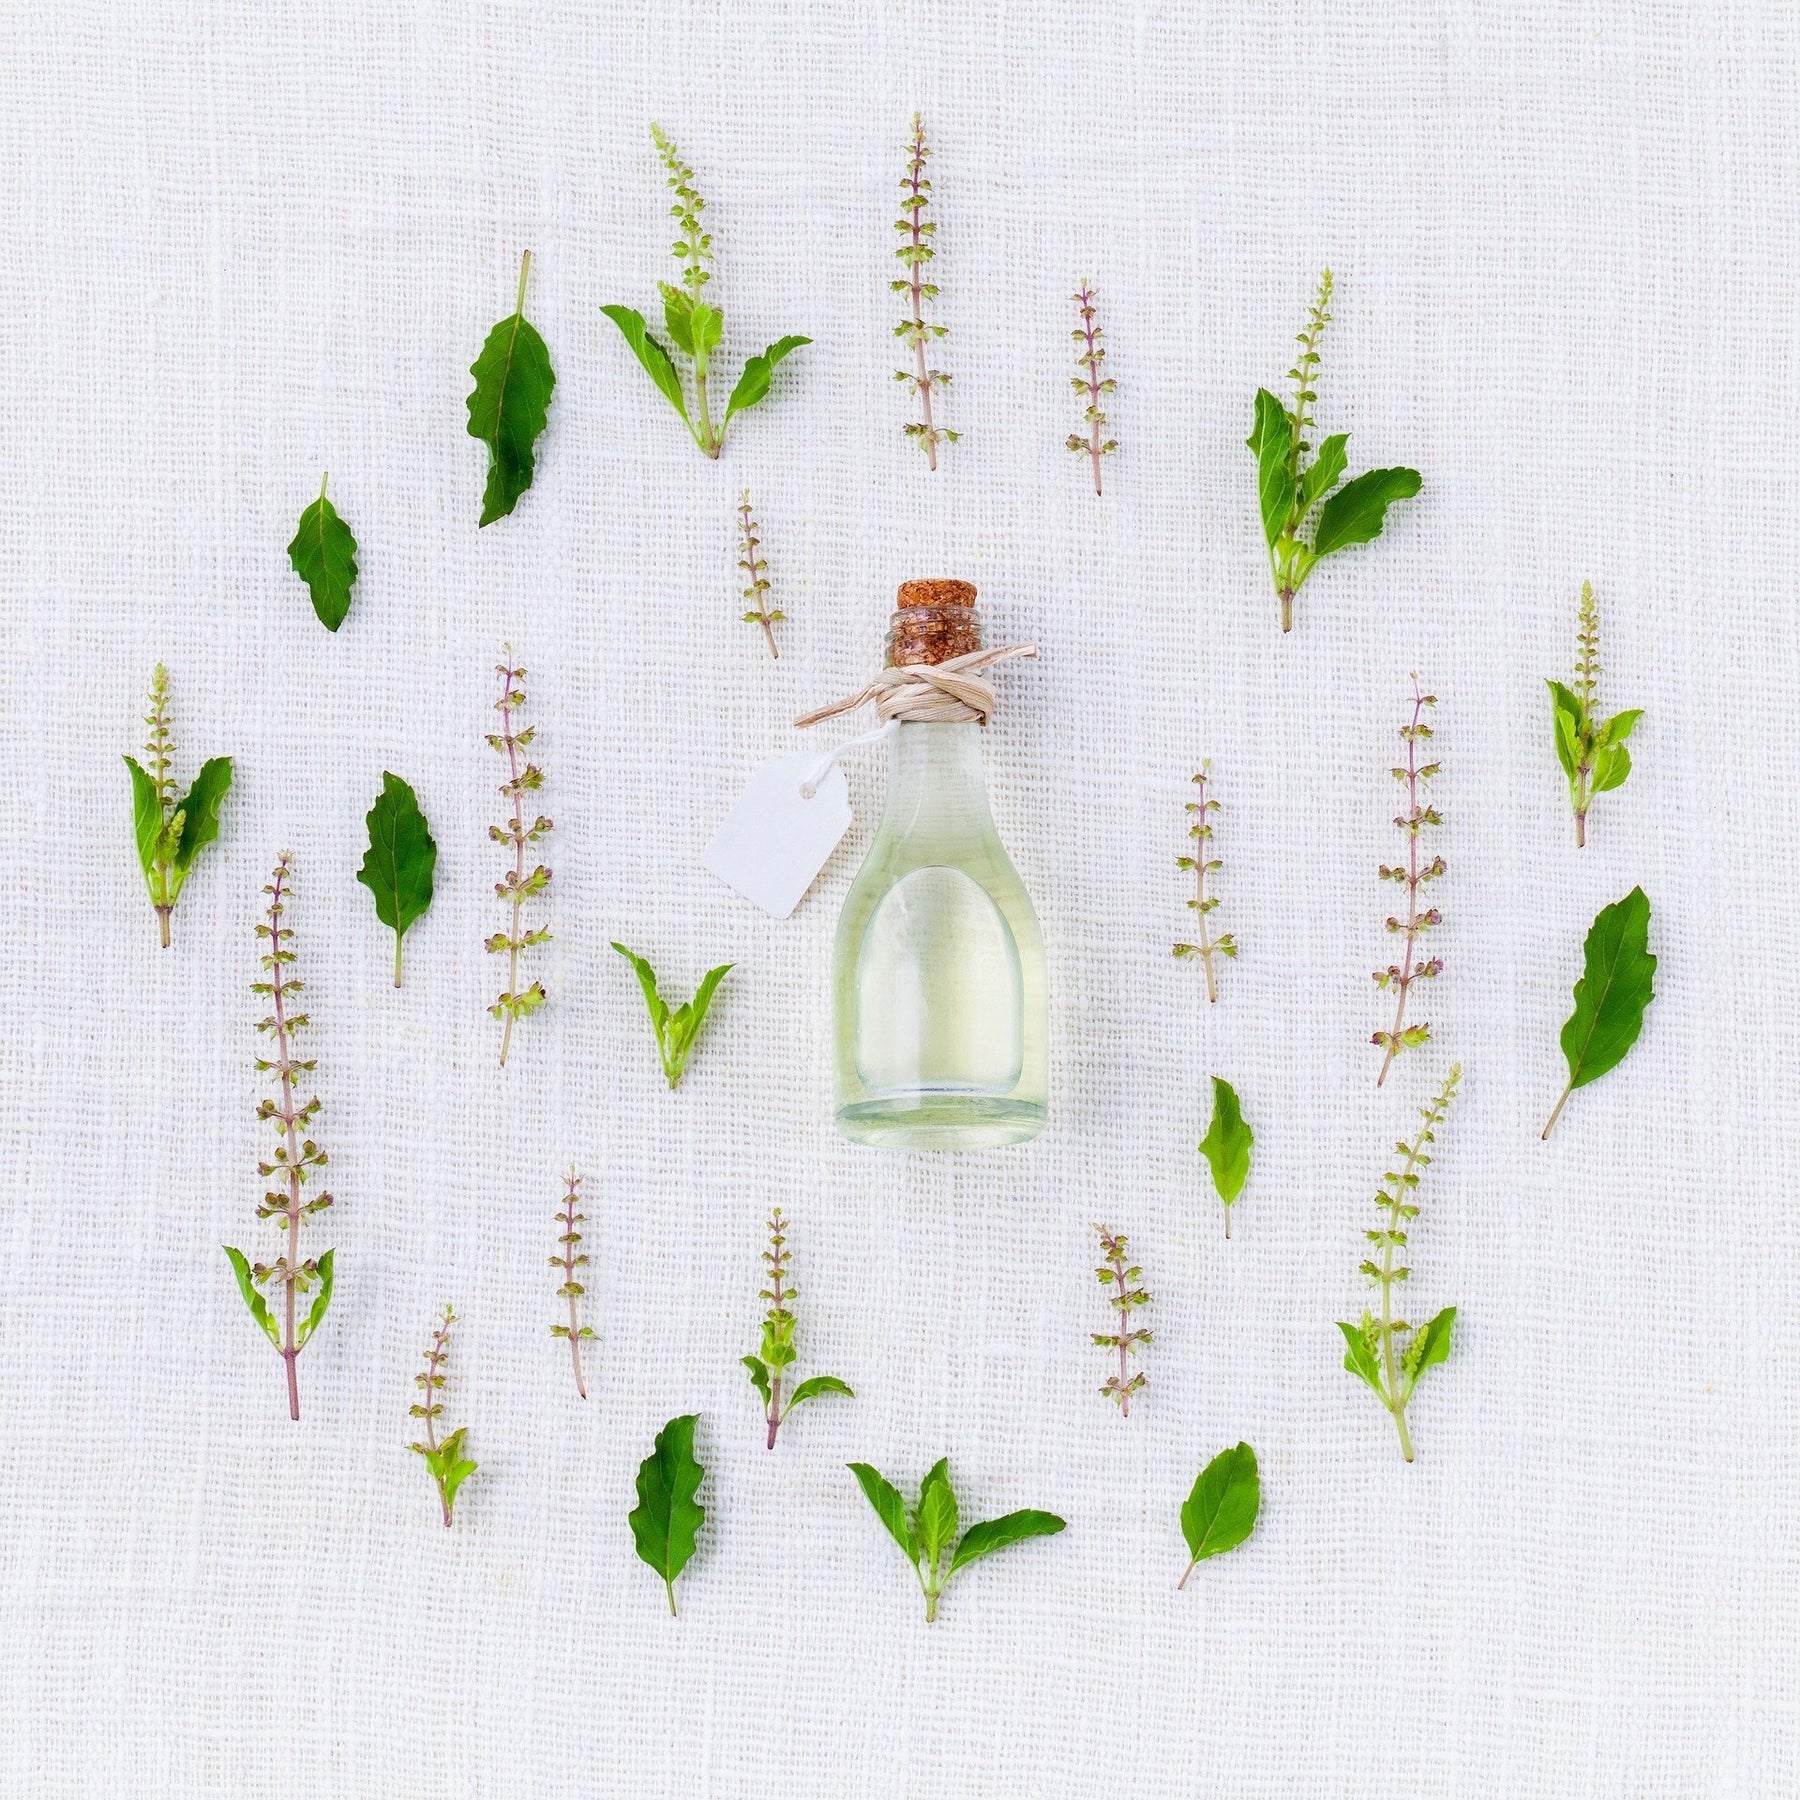 Transparent bottle surrounded by herbs